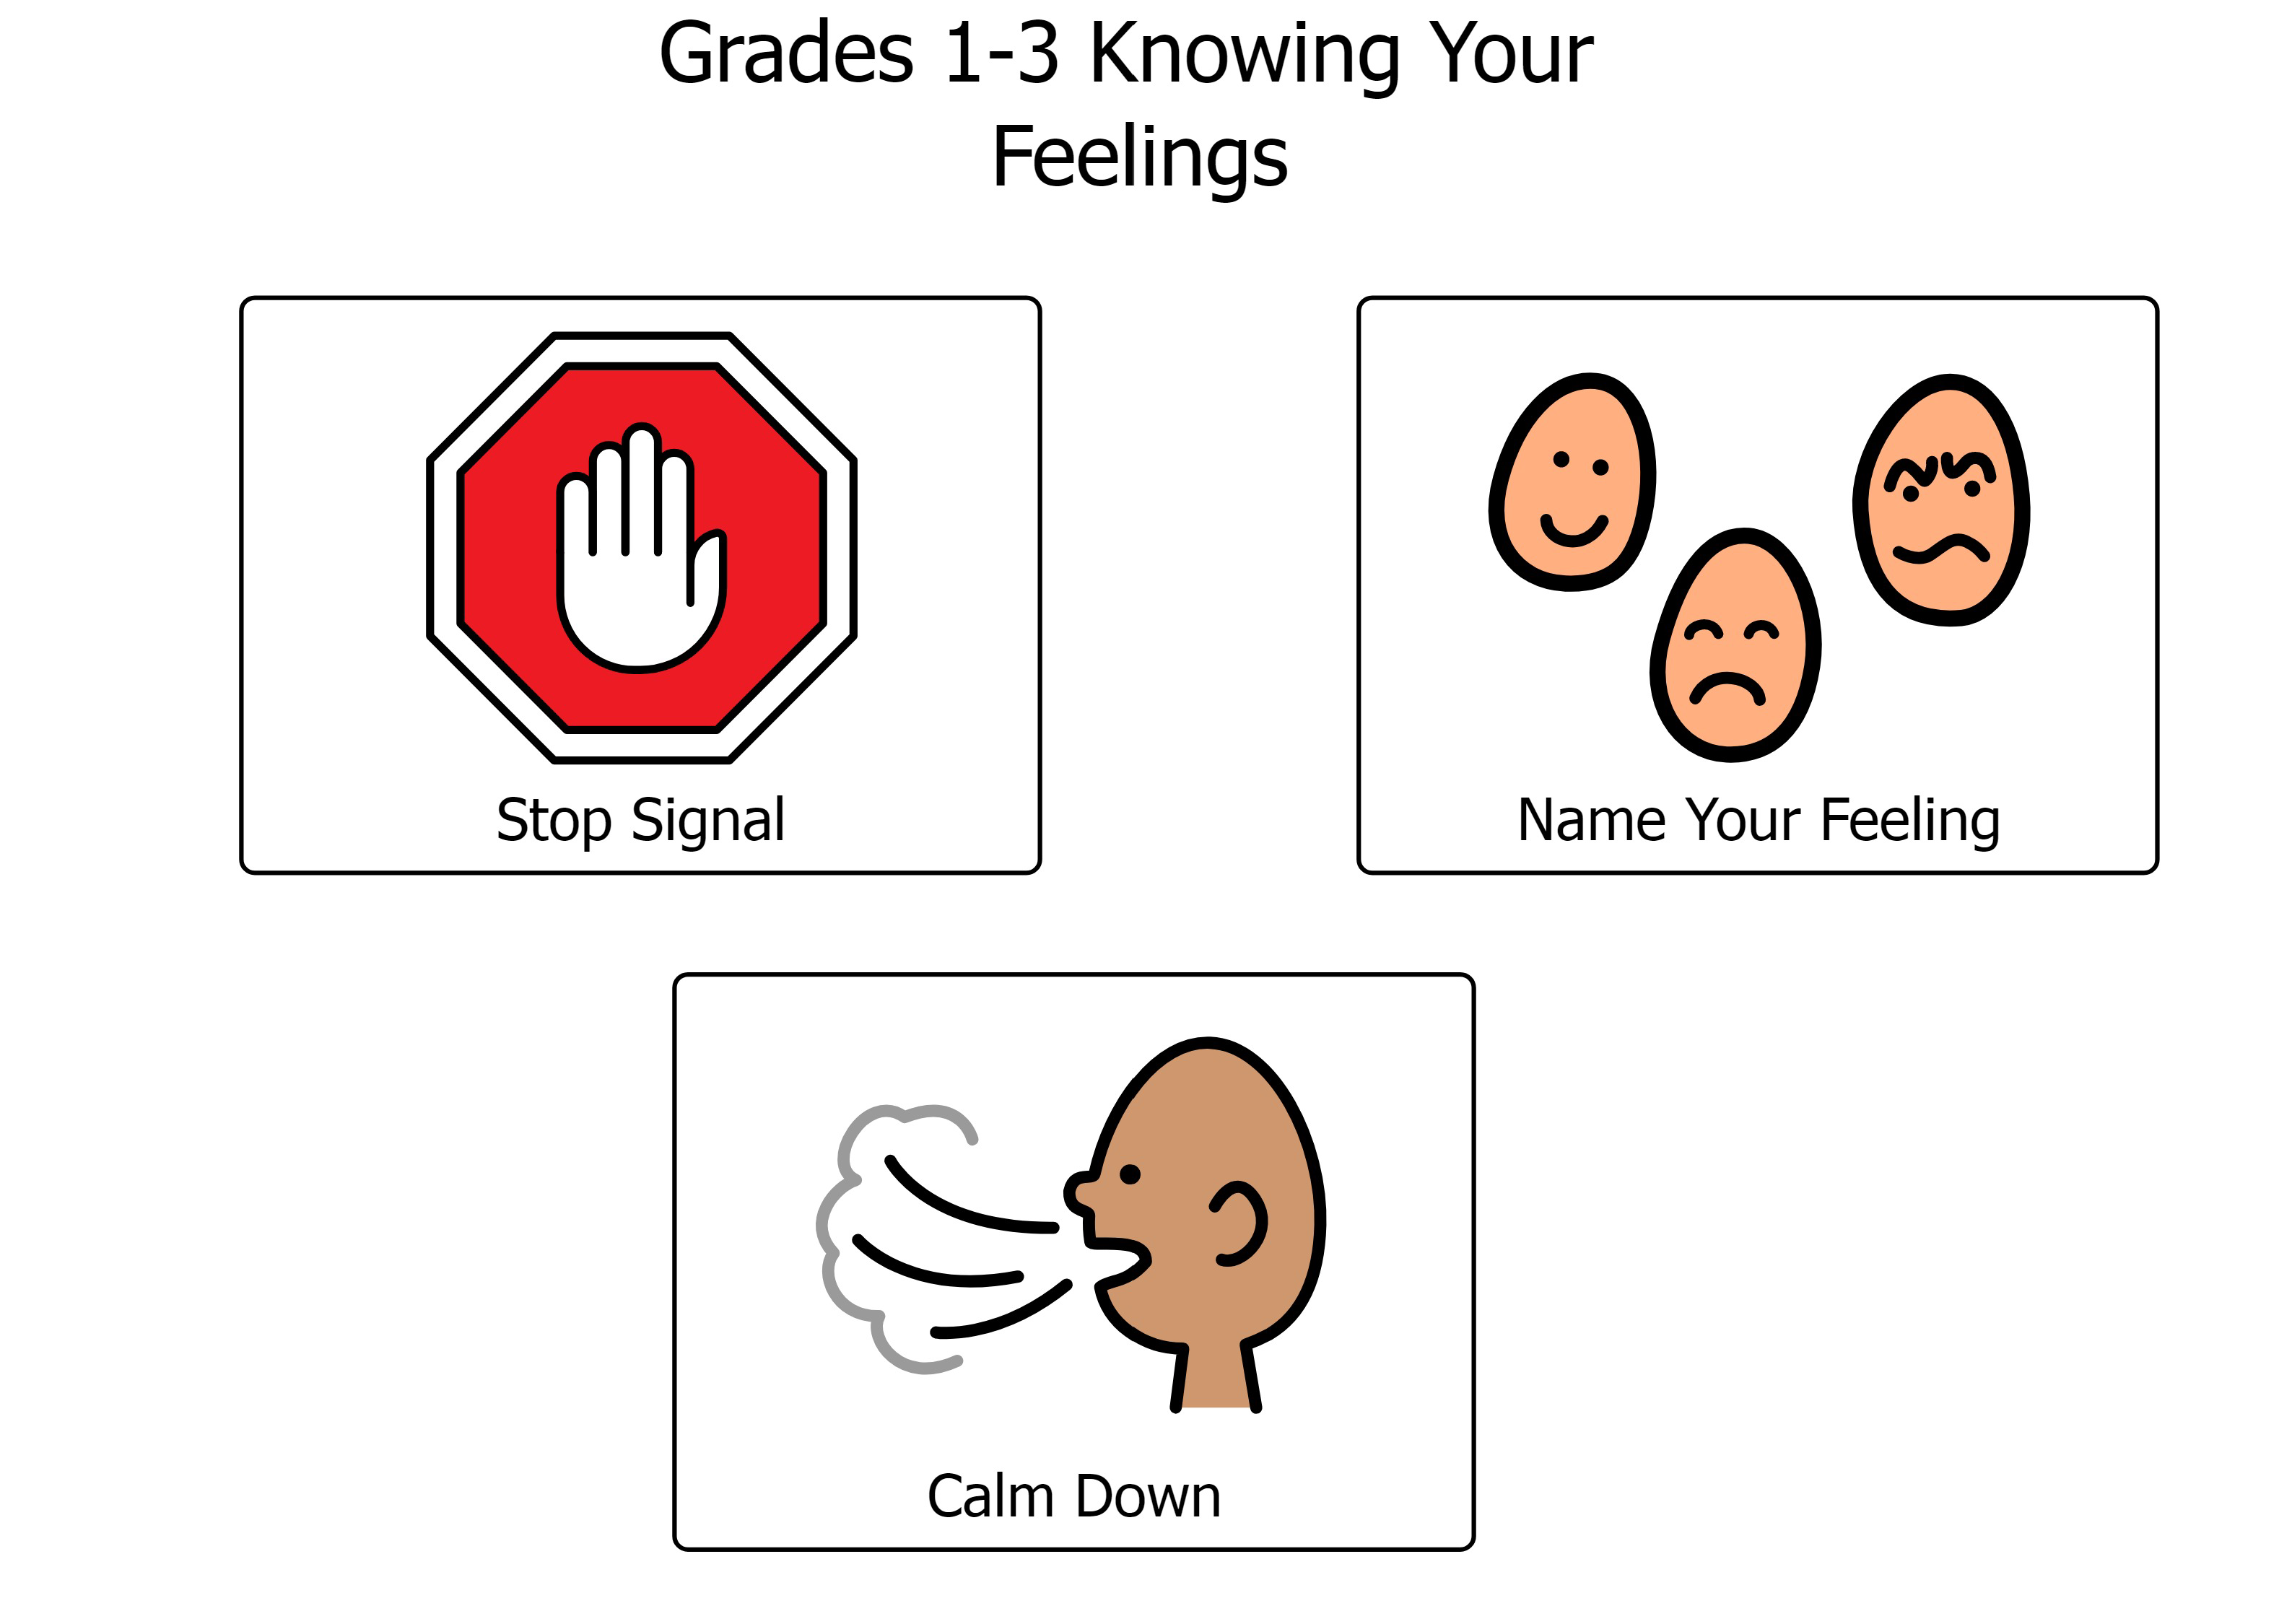 Grades 1-3 Knowing Your Feelings poster